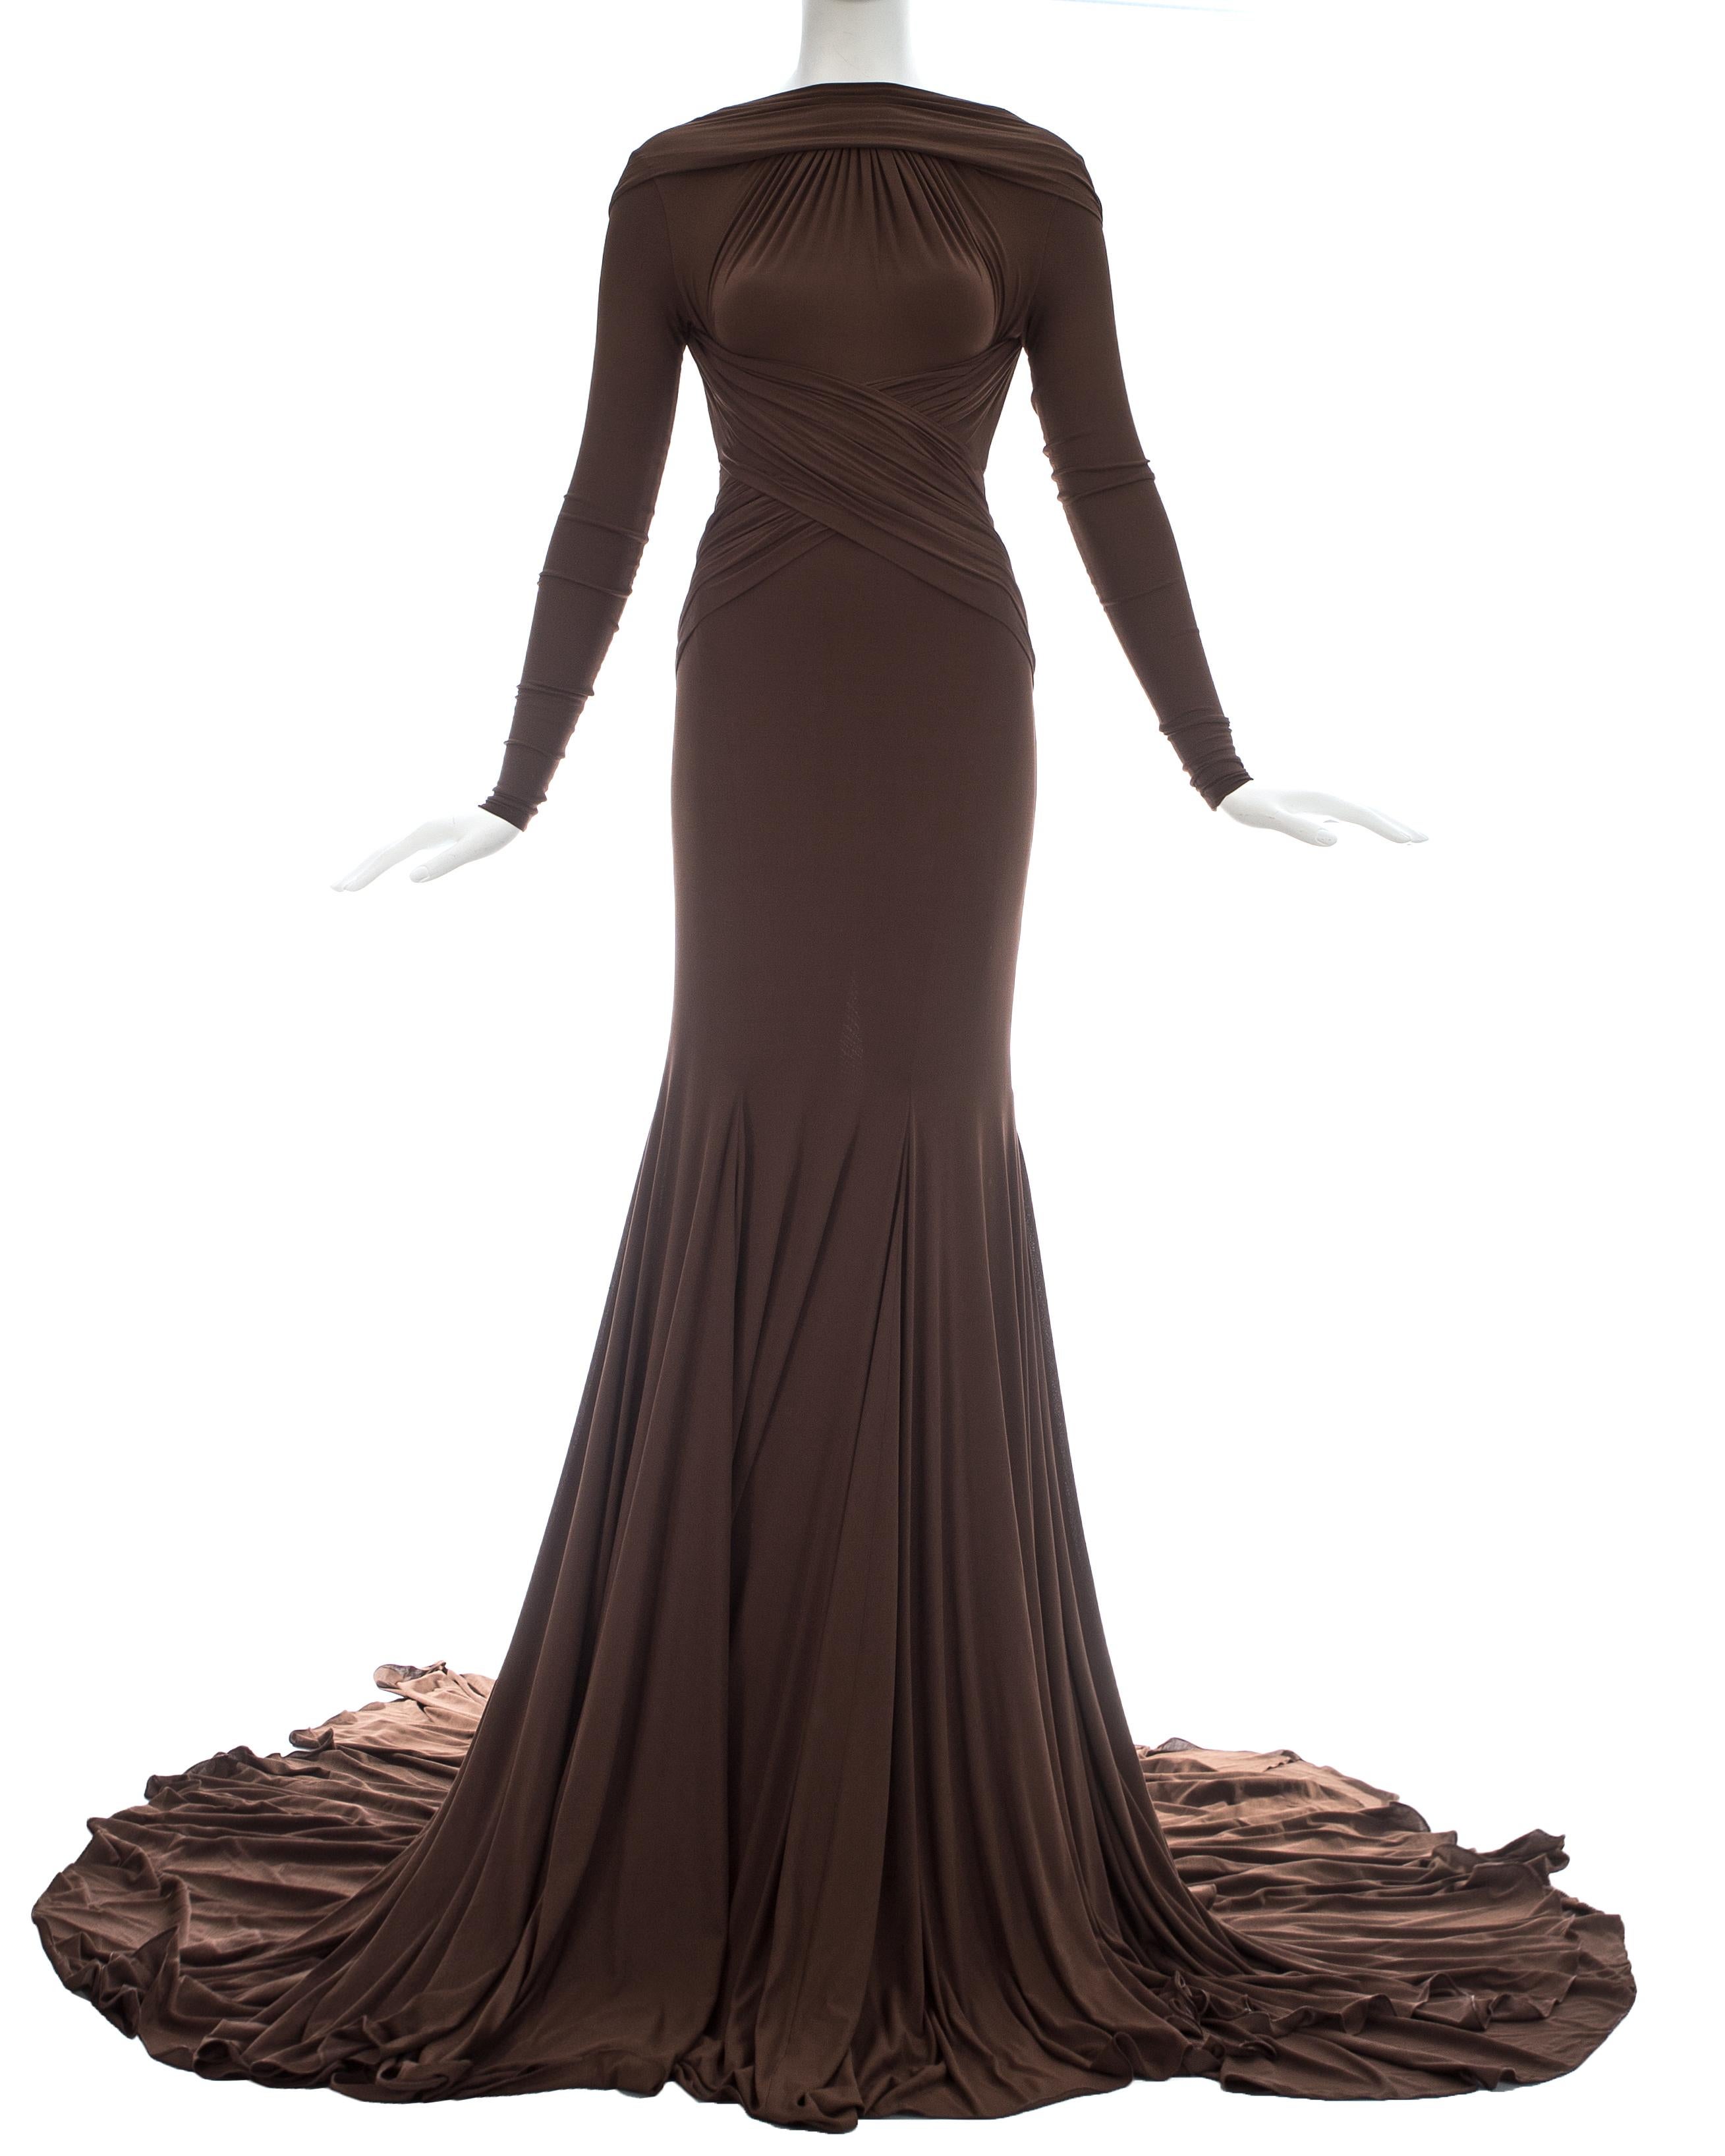 Brown Viscose jersey backless evening gown with long train and pleated panels bound around the bust

Spring-Summer 2005 